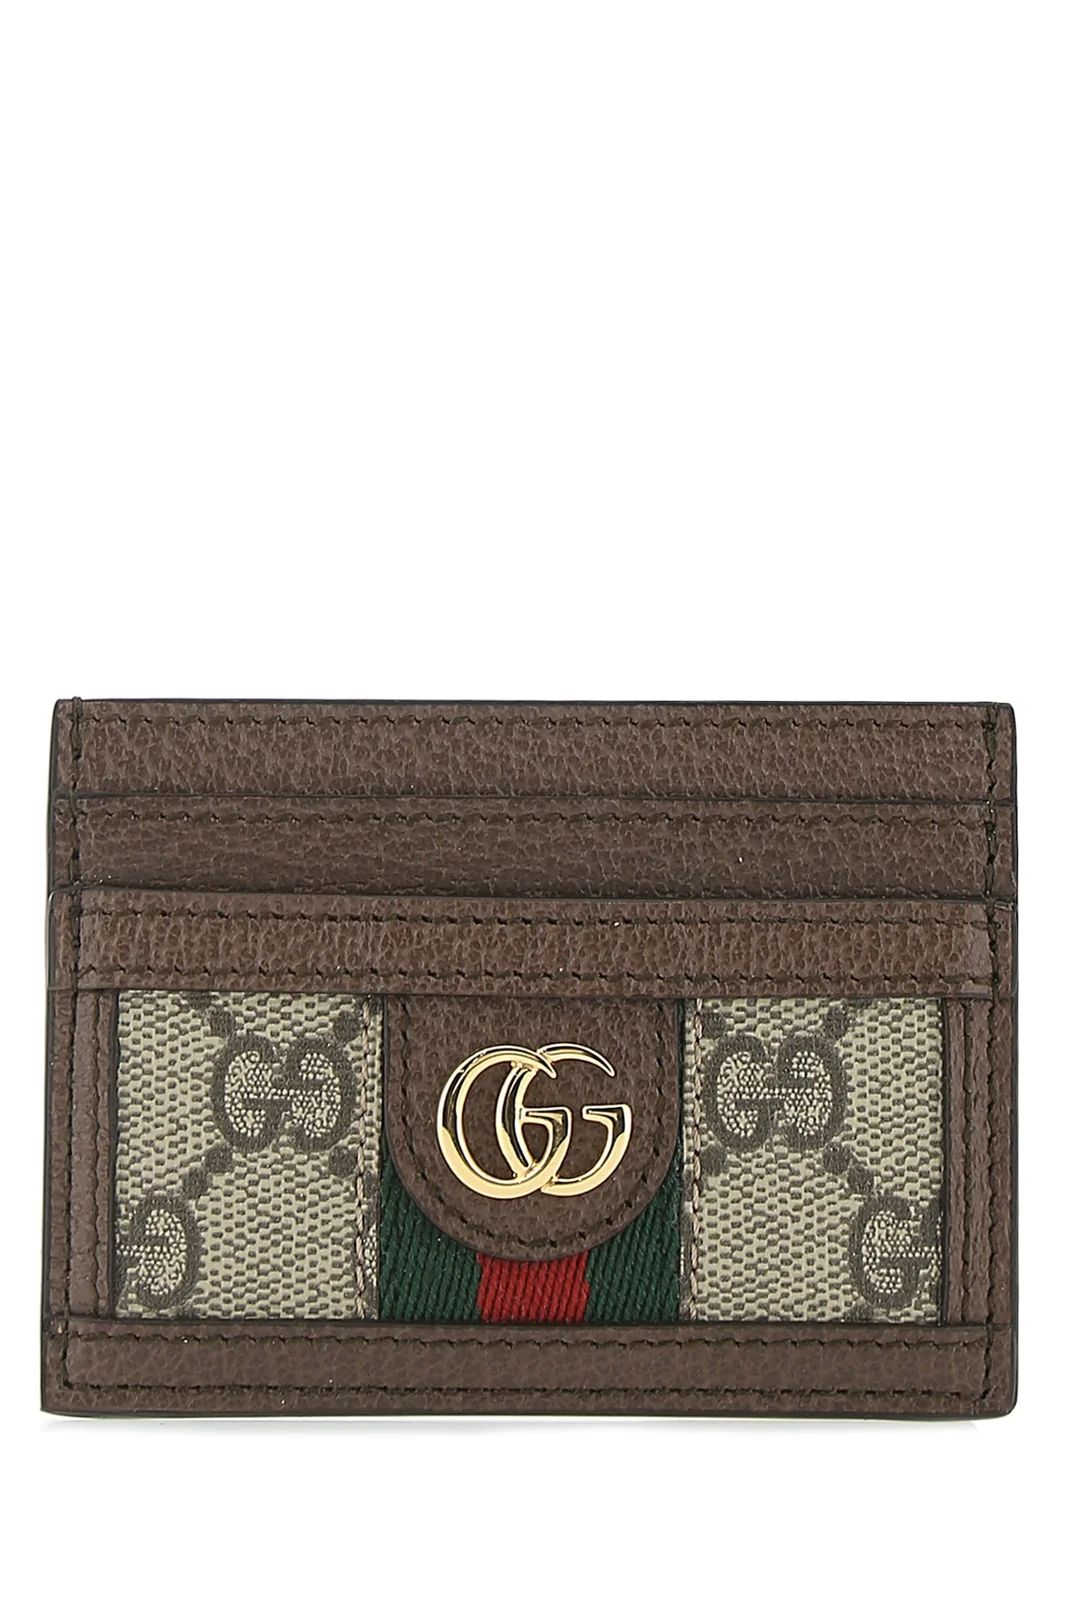 Gucci Ophidia GG Card Case | Cettire Global